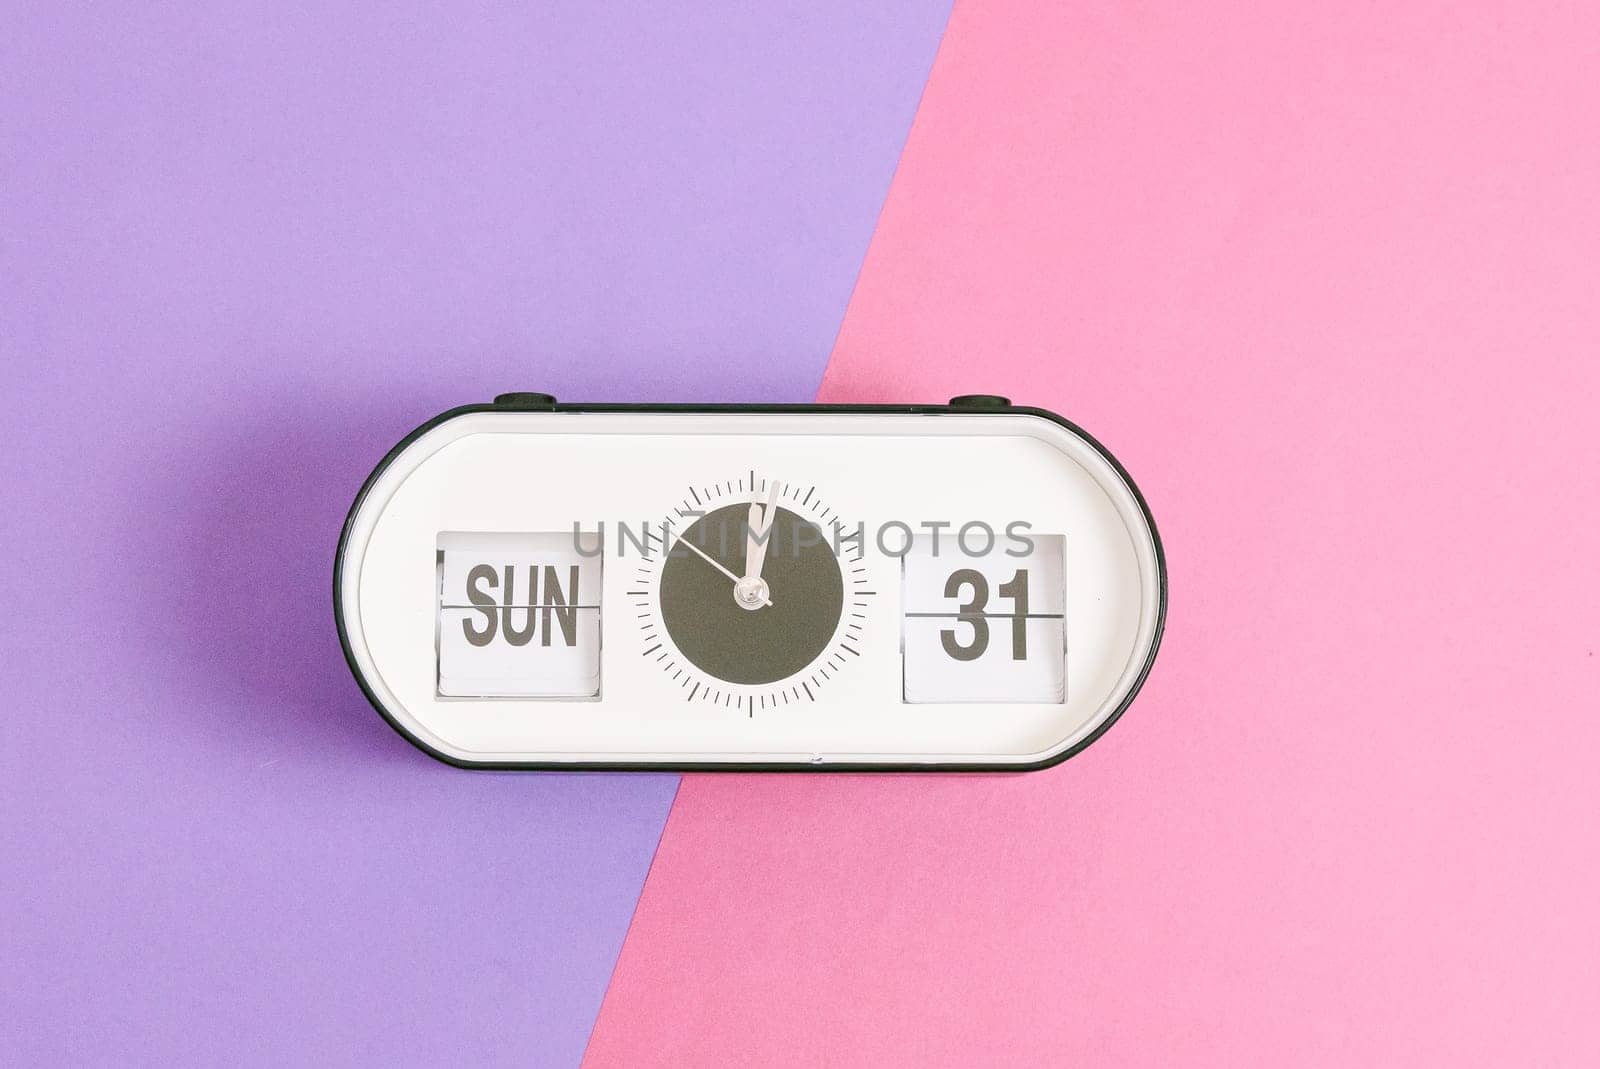 One alarm clock with the date and time of Easter 2024: Sunday March 31 lies in the center on a lilac pink background, flat lay close-up. Concept reminder, holiday time.